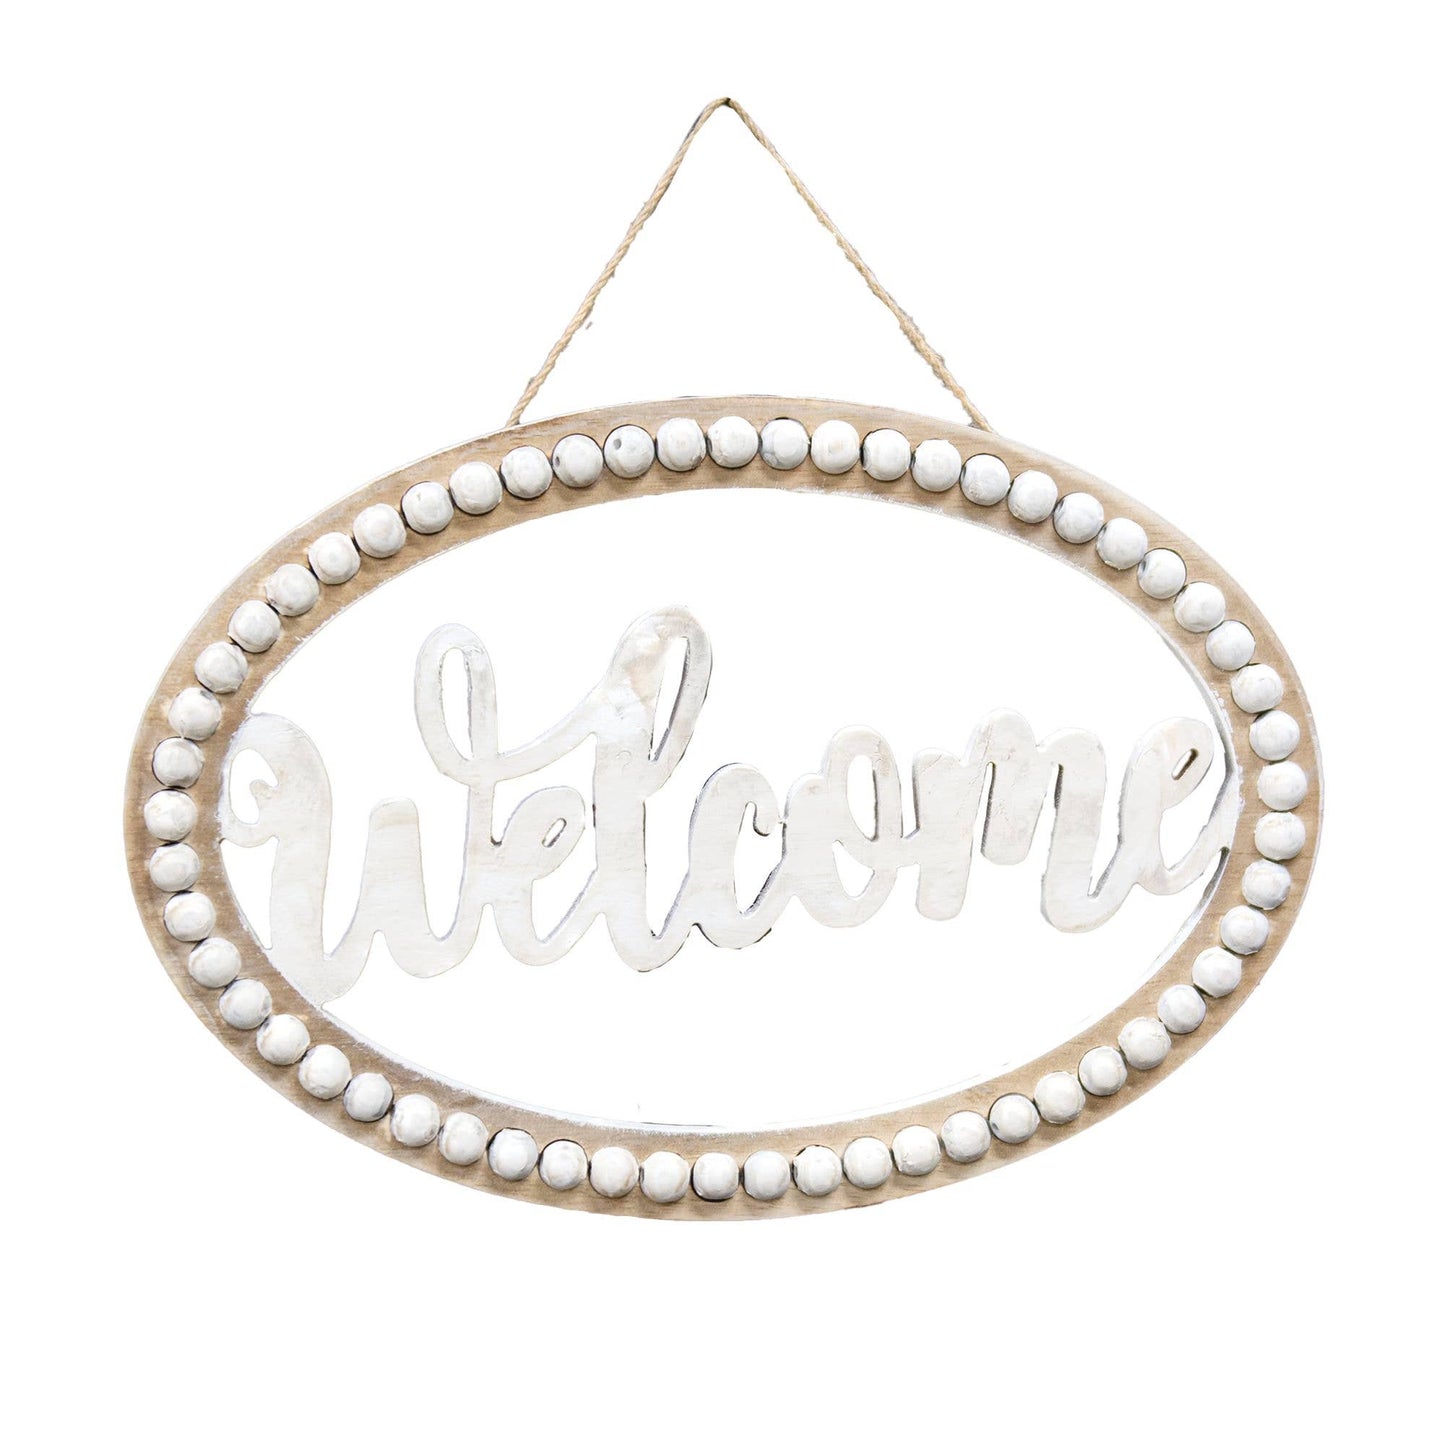 Distressed Beaded Wall Sign, "Welcome"..